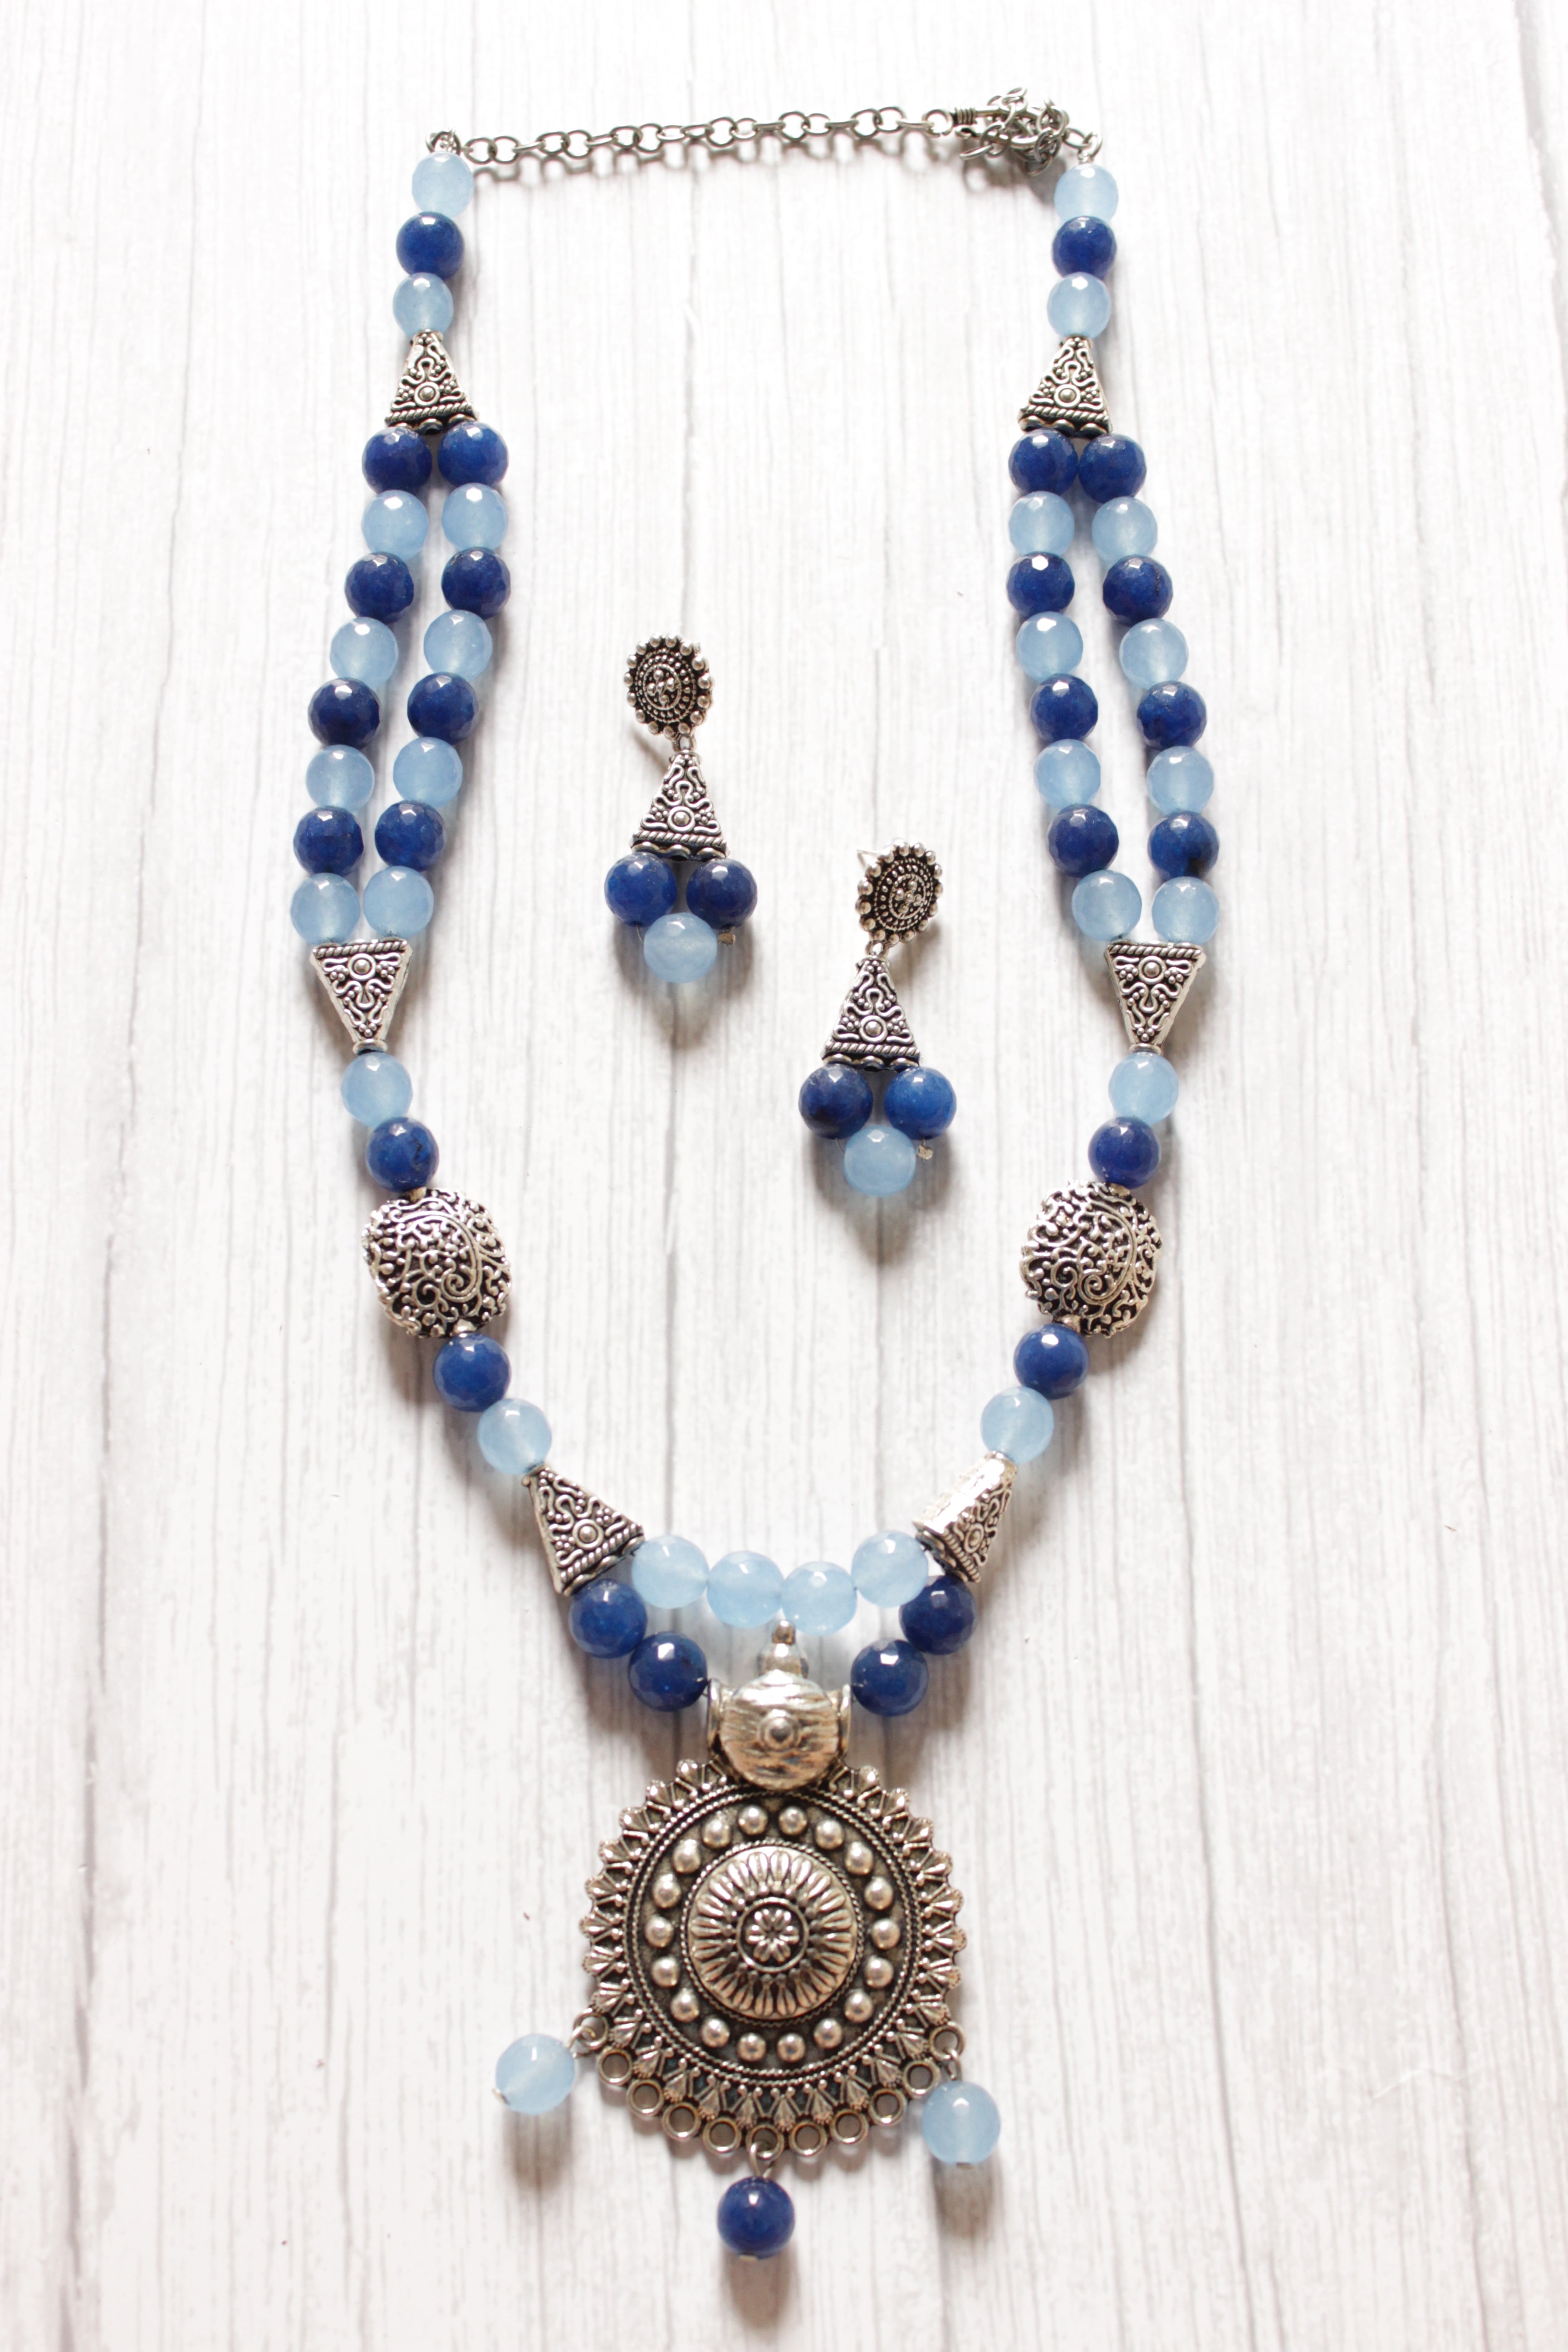 Shades of Blue Jade Beads Metal Pendant Necklace Set